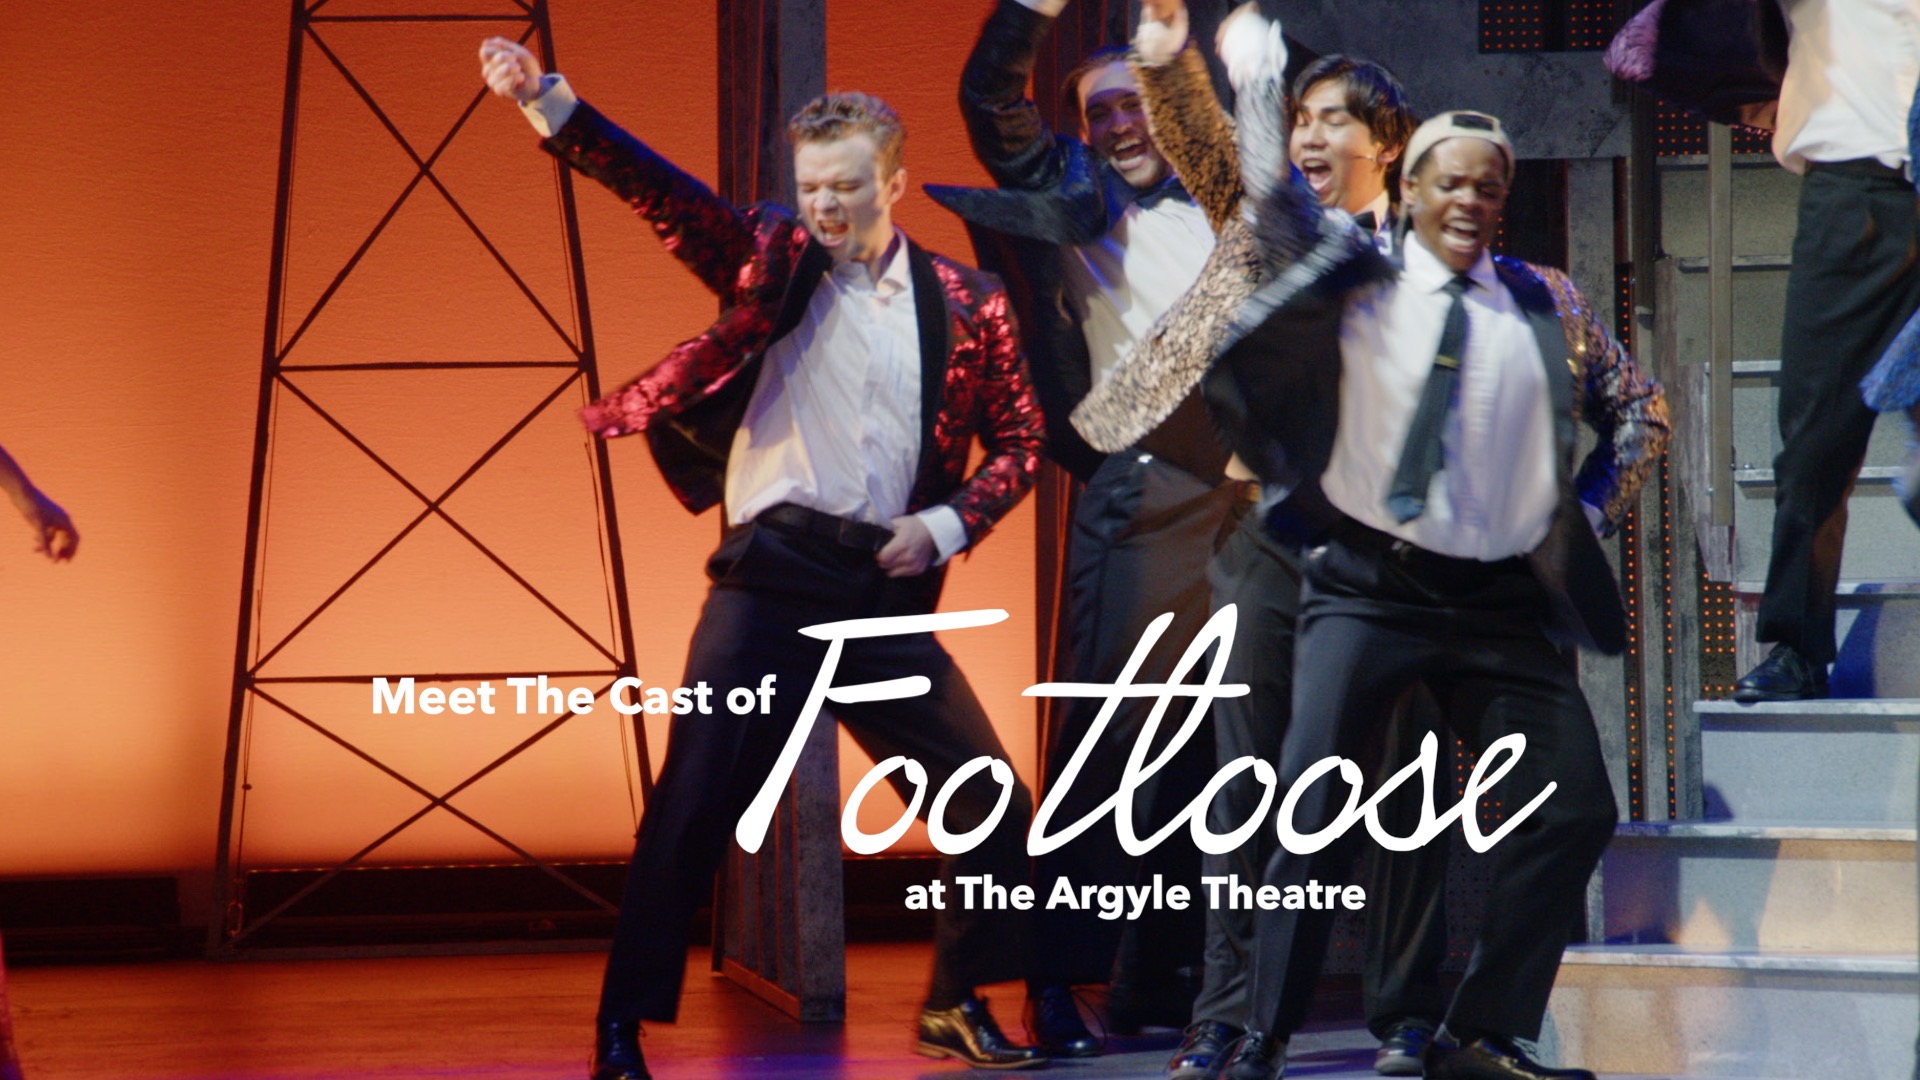 Meet The Cast of Footloose at The Argyle Theatre